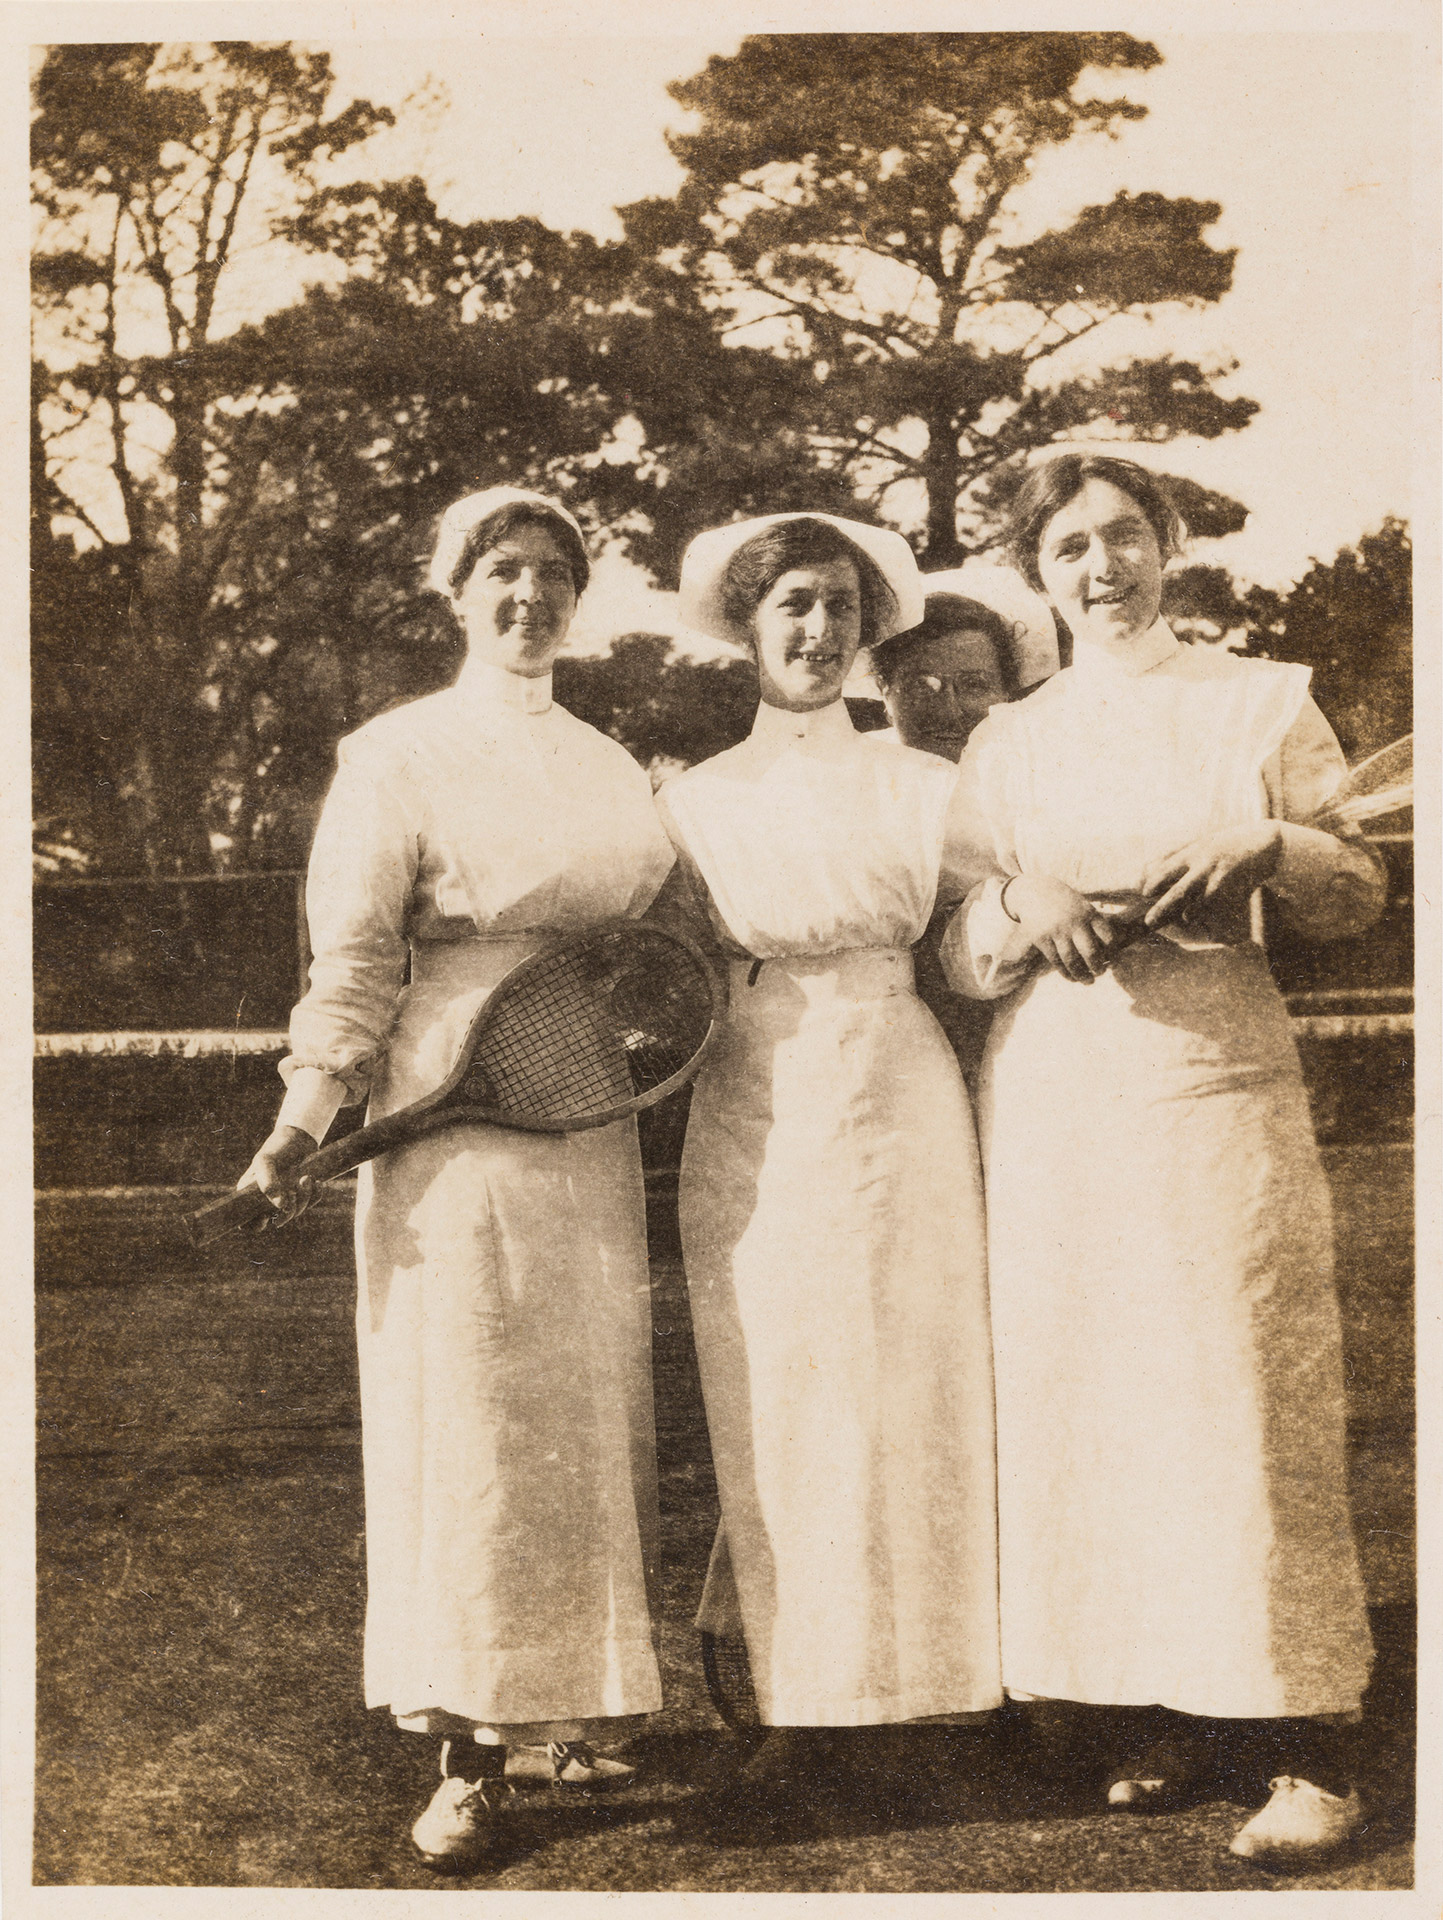 A sepia photograph depicting four women in nurse uniform standing together.